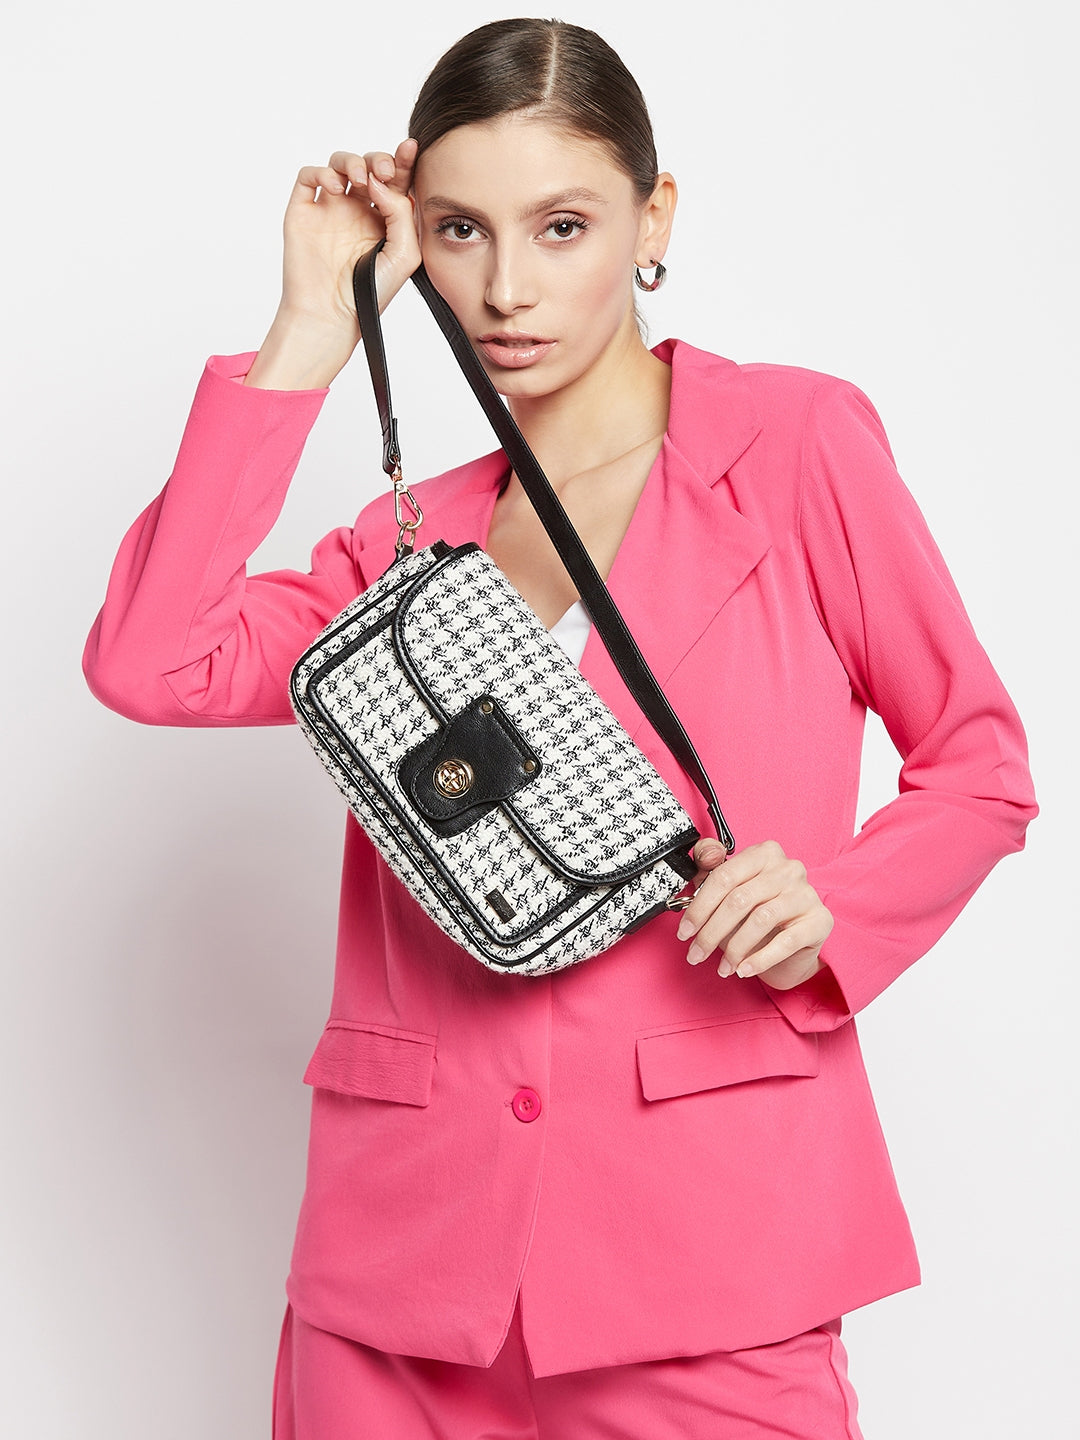 Berrylush Textured Structured Handheld Bag with Quilted